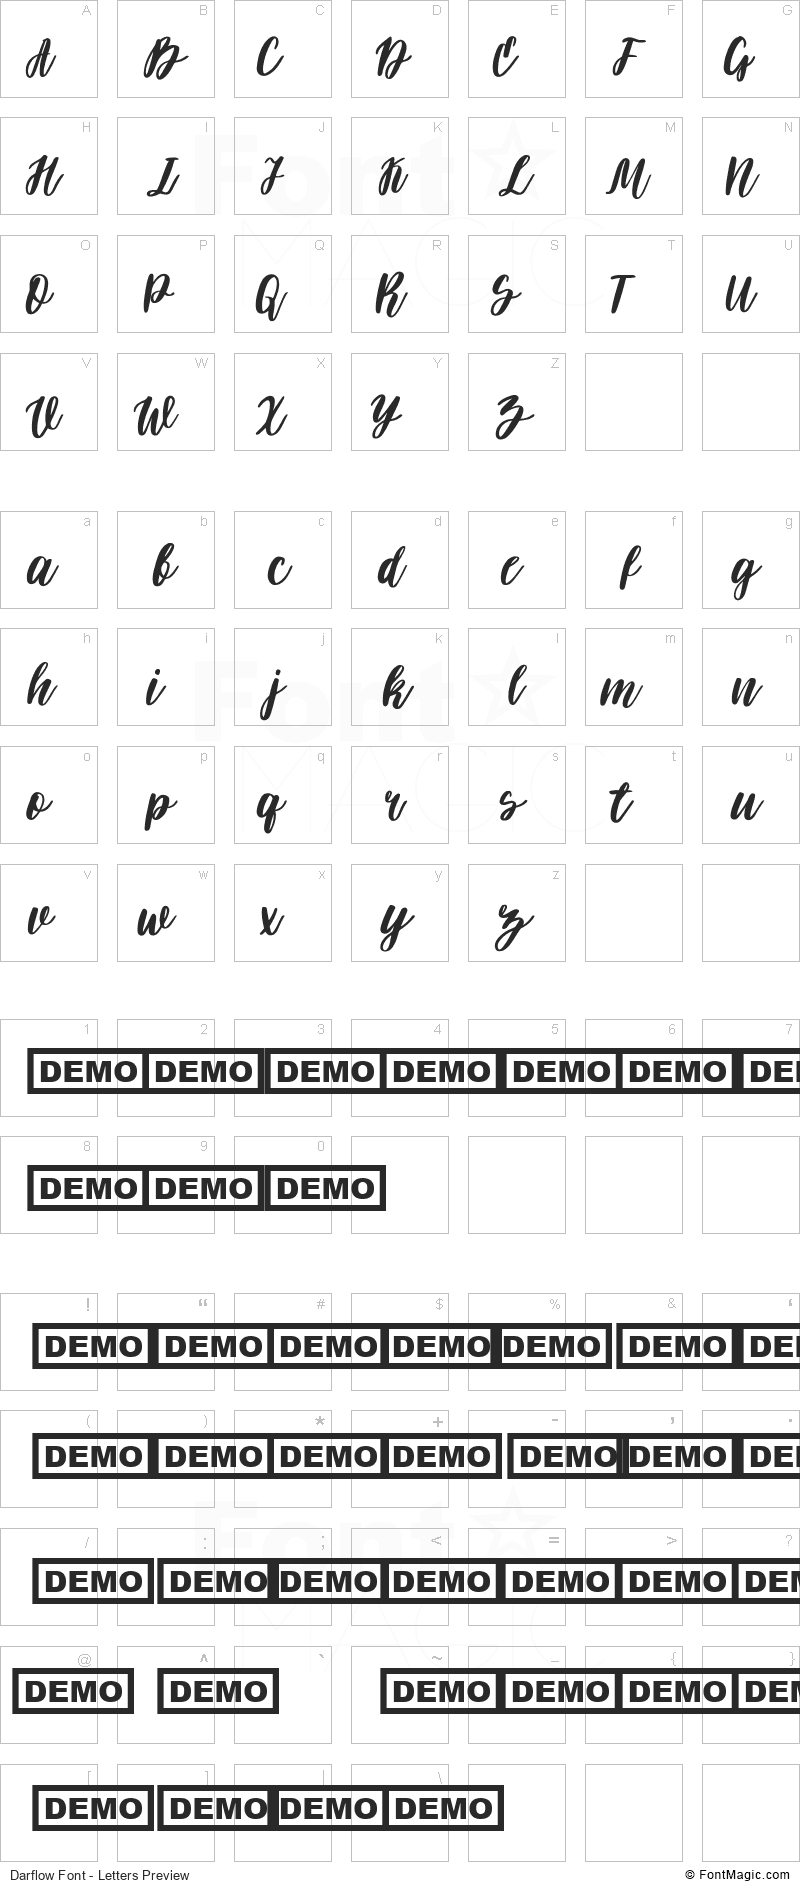 Darflow Font - All Latters Preview Chart